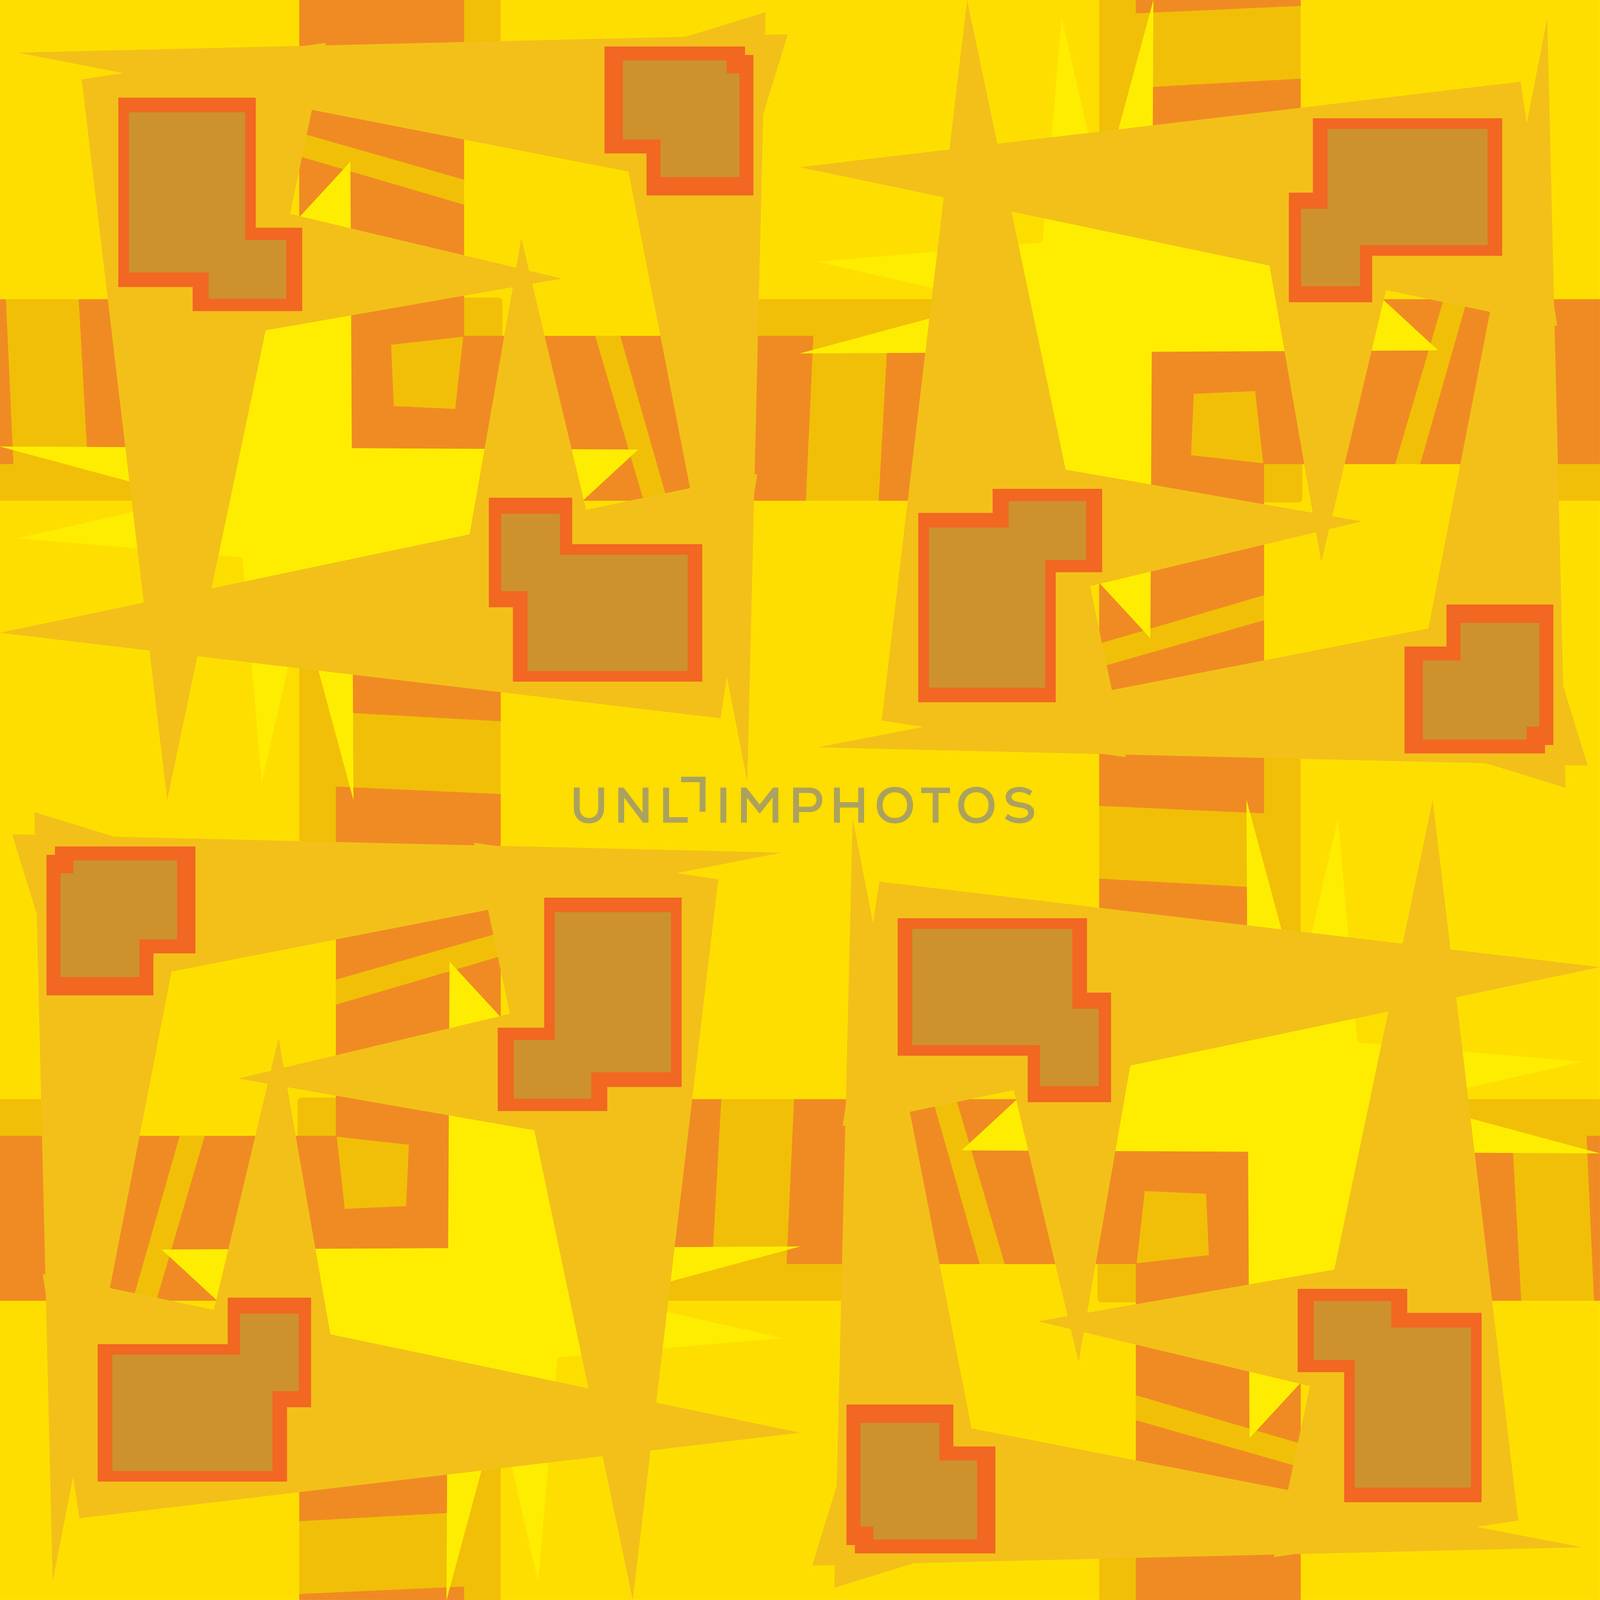 Abstract Yellow Rectangular Shapes by TheBlackRhino